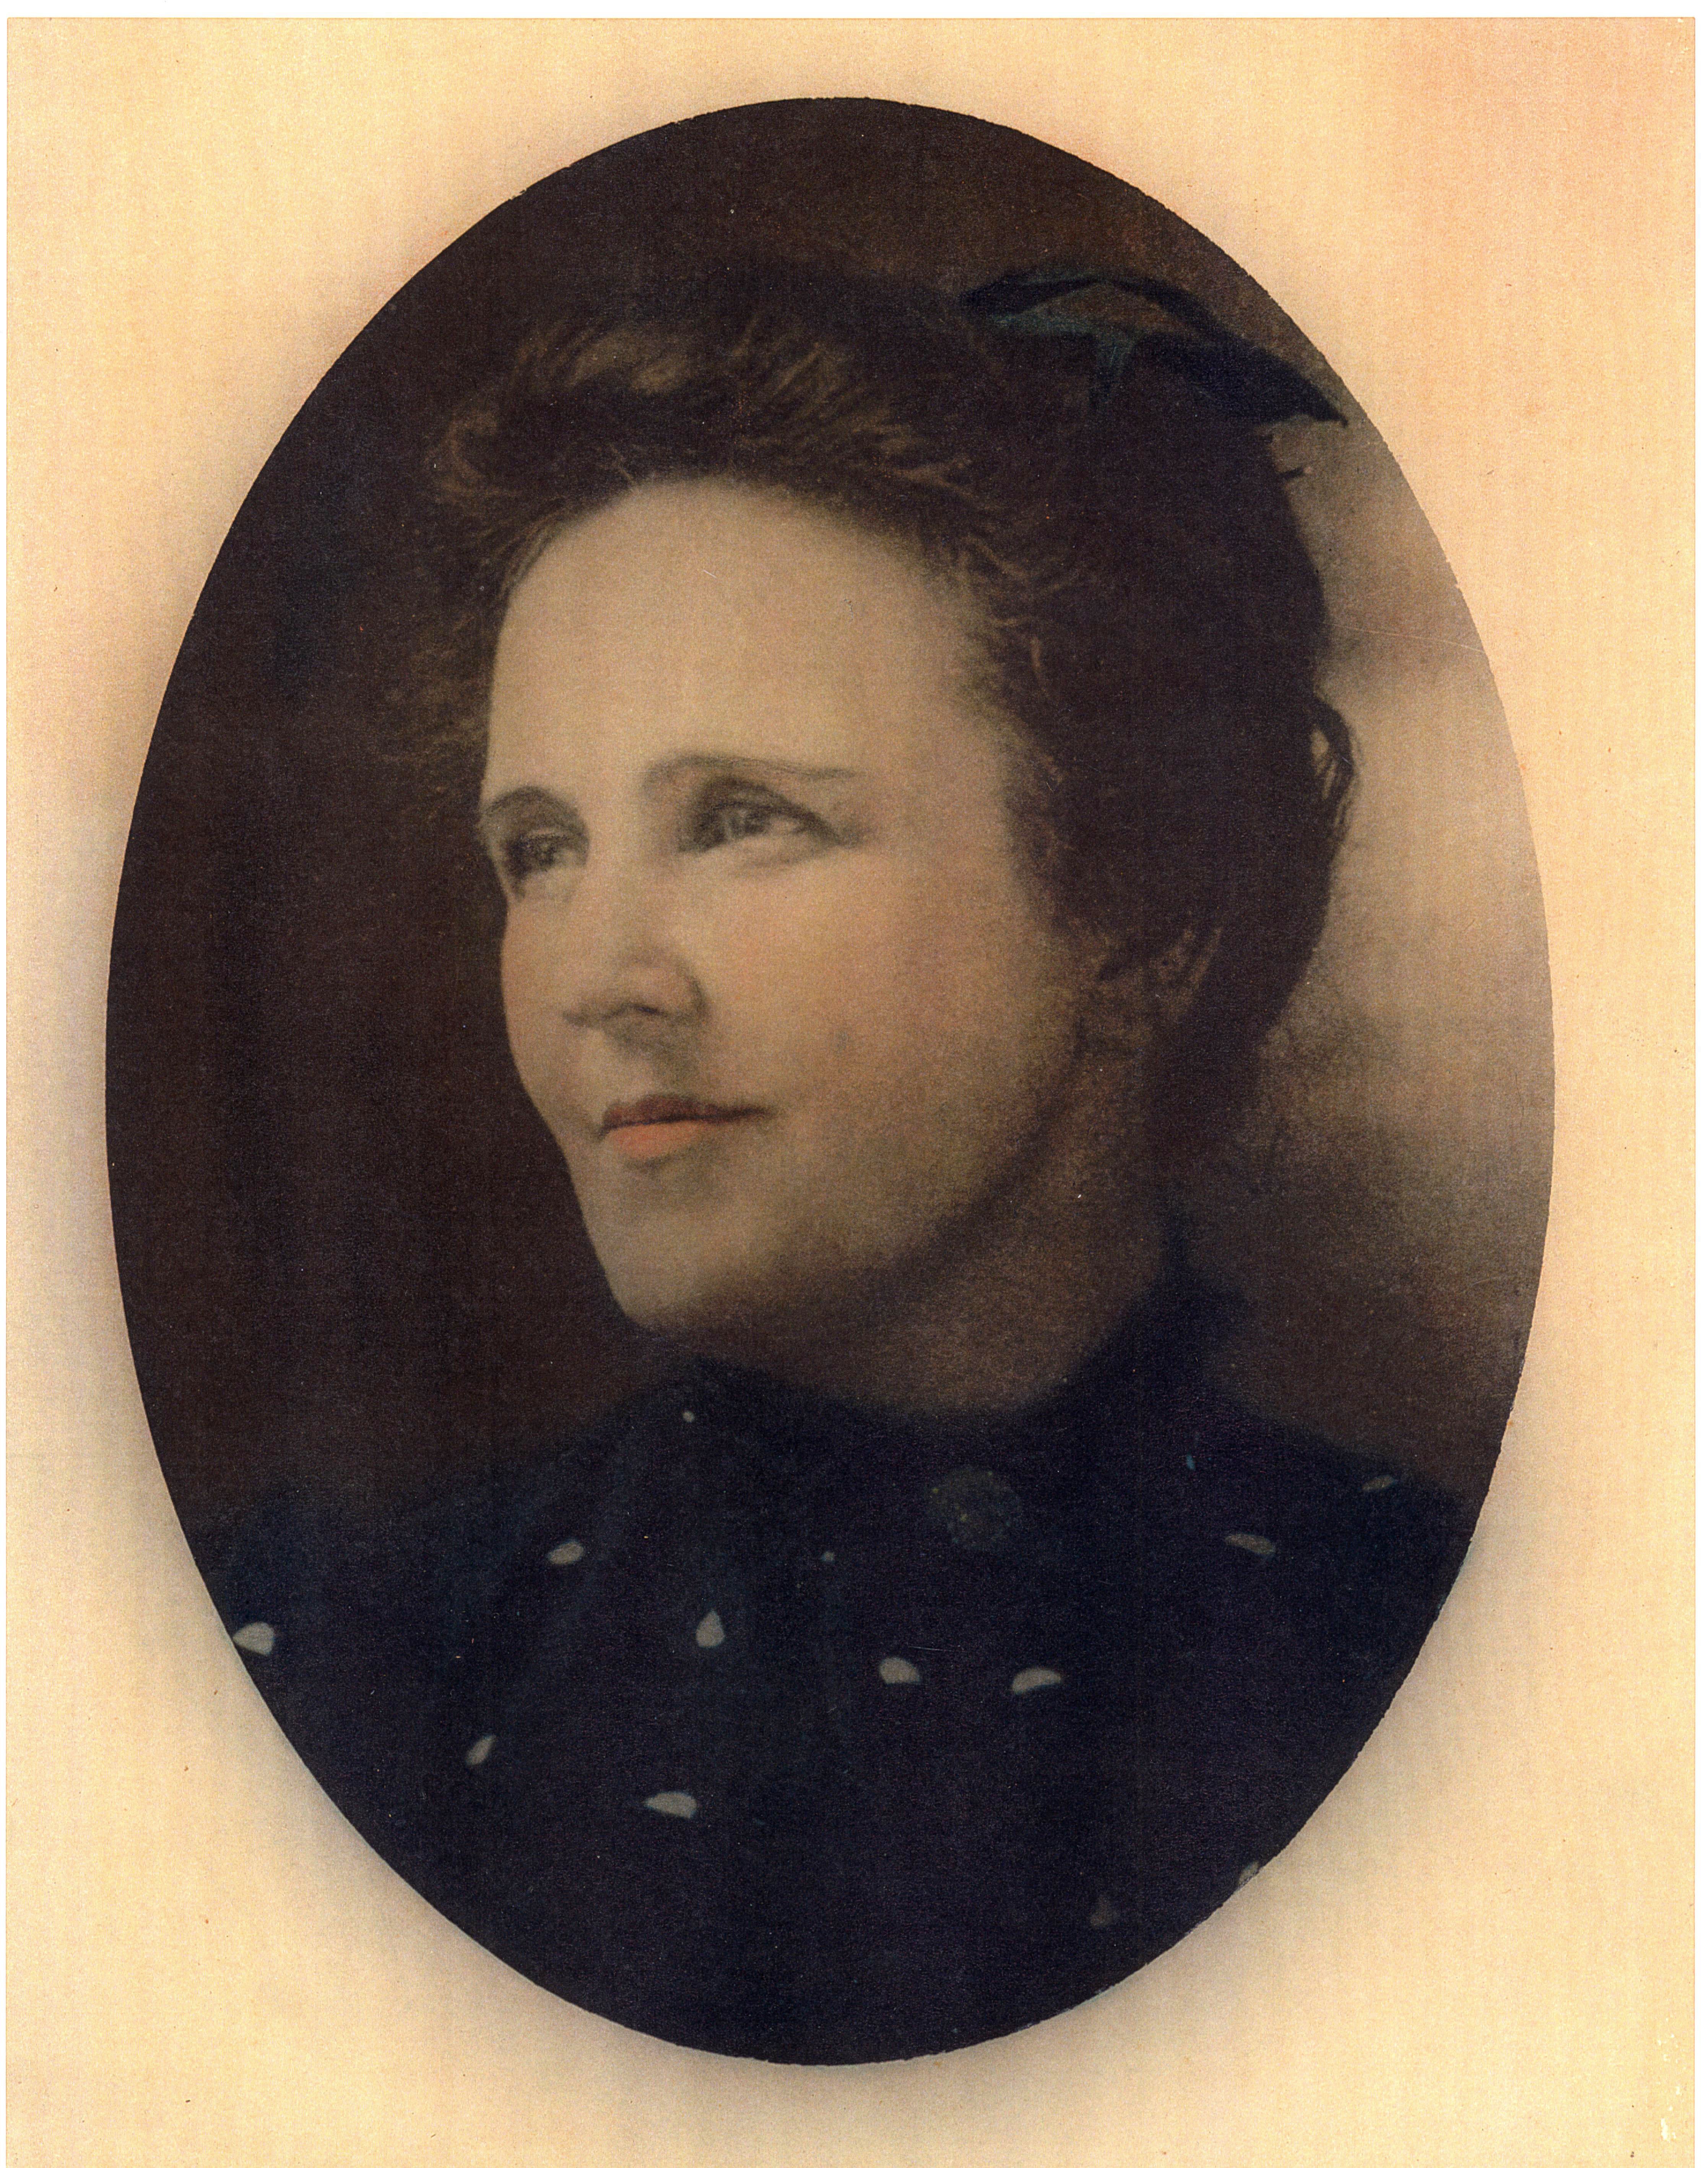 Portrait of Miss Lucie Richards with her hair pulled back.